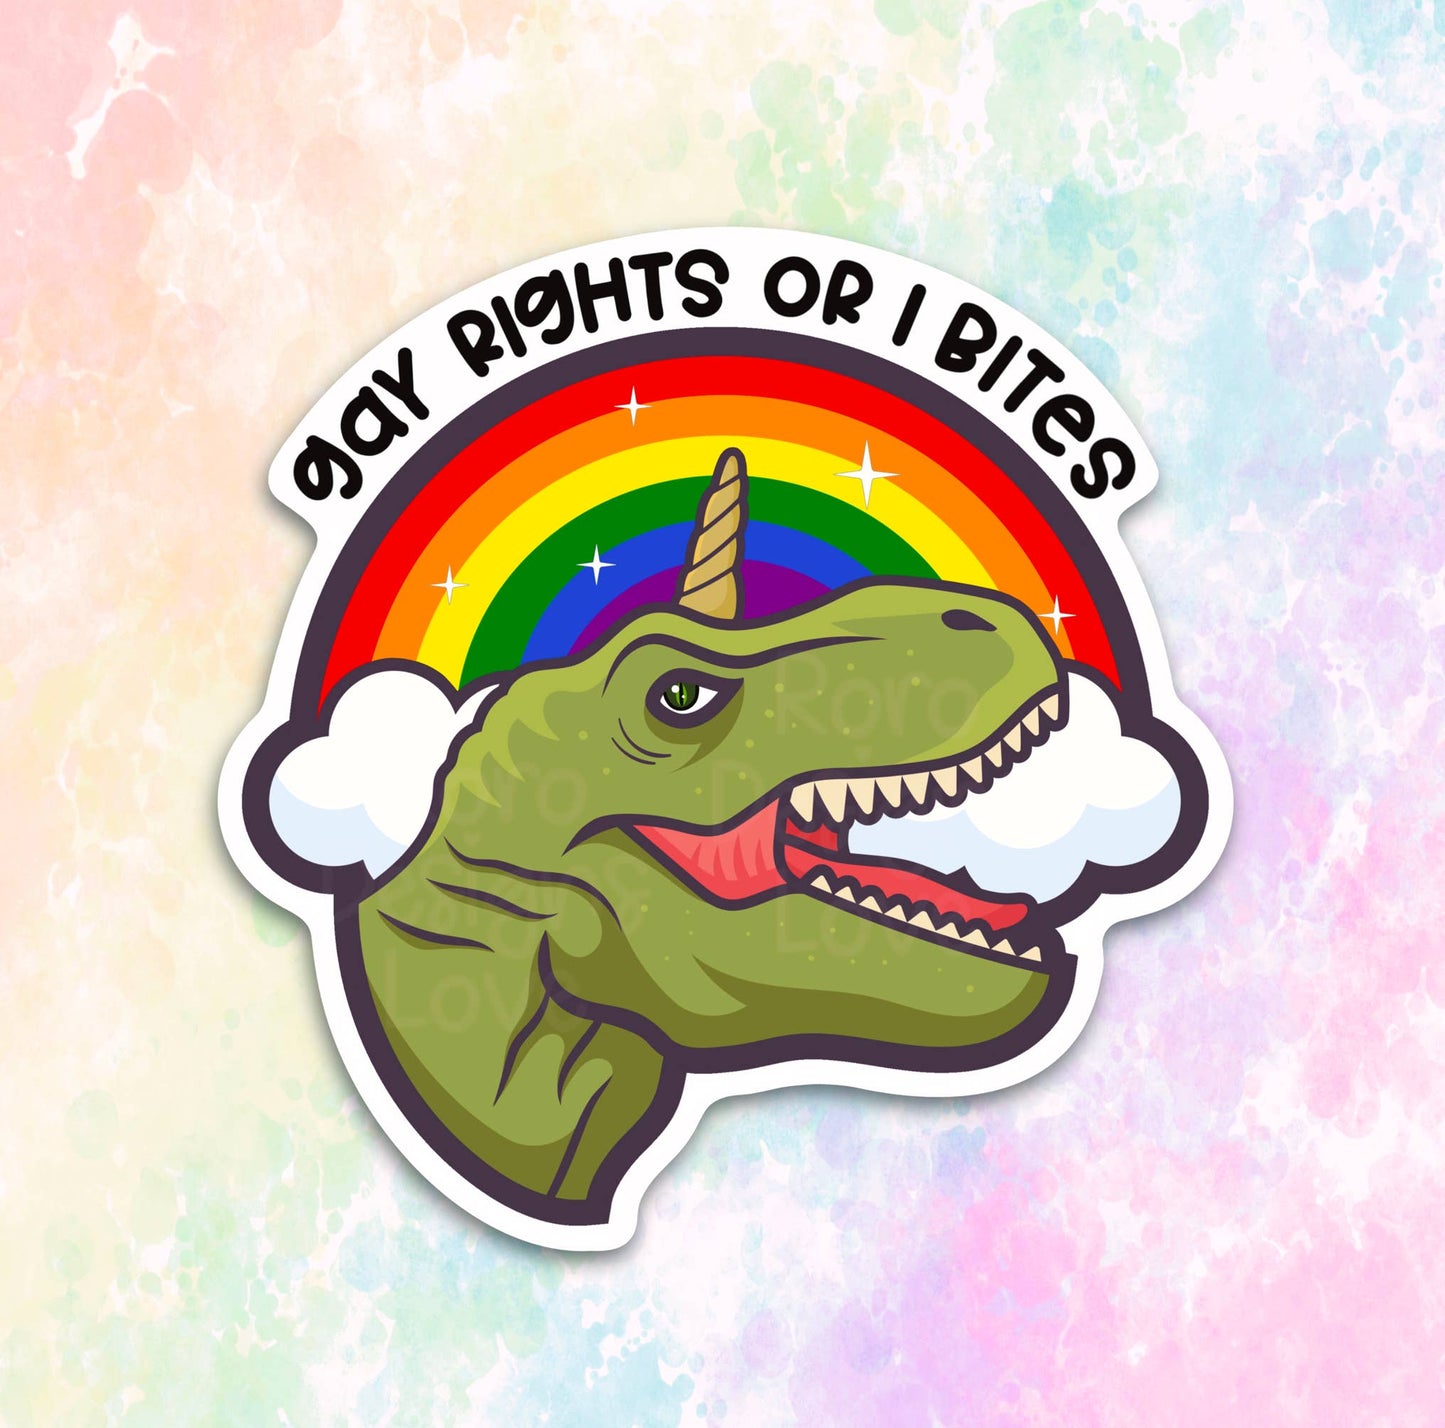 Gay rights or I bites sticker, LGBT rainbow t-rex decal: 3" / Loose